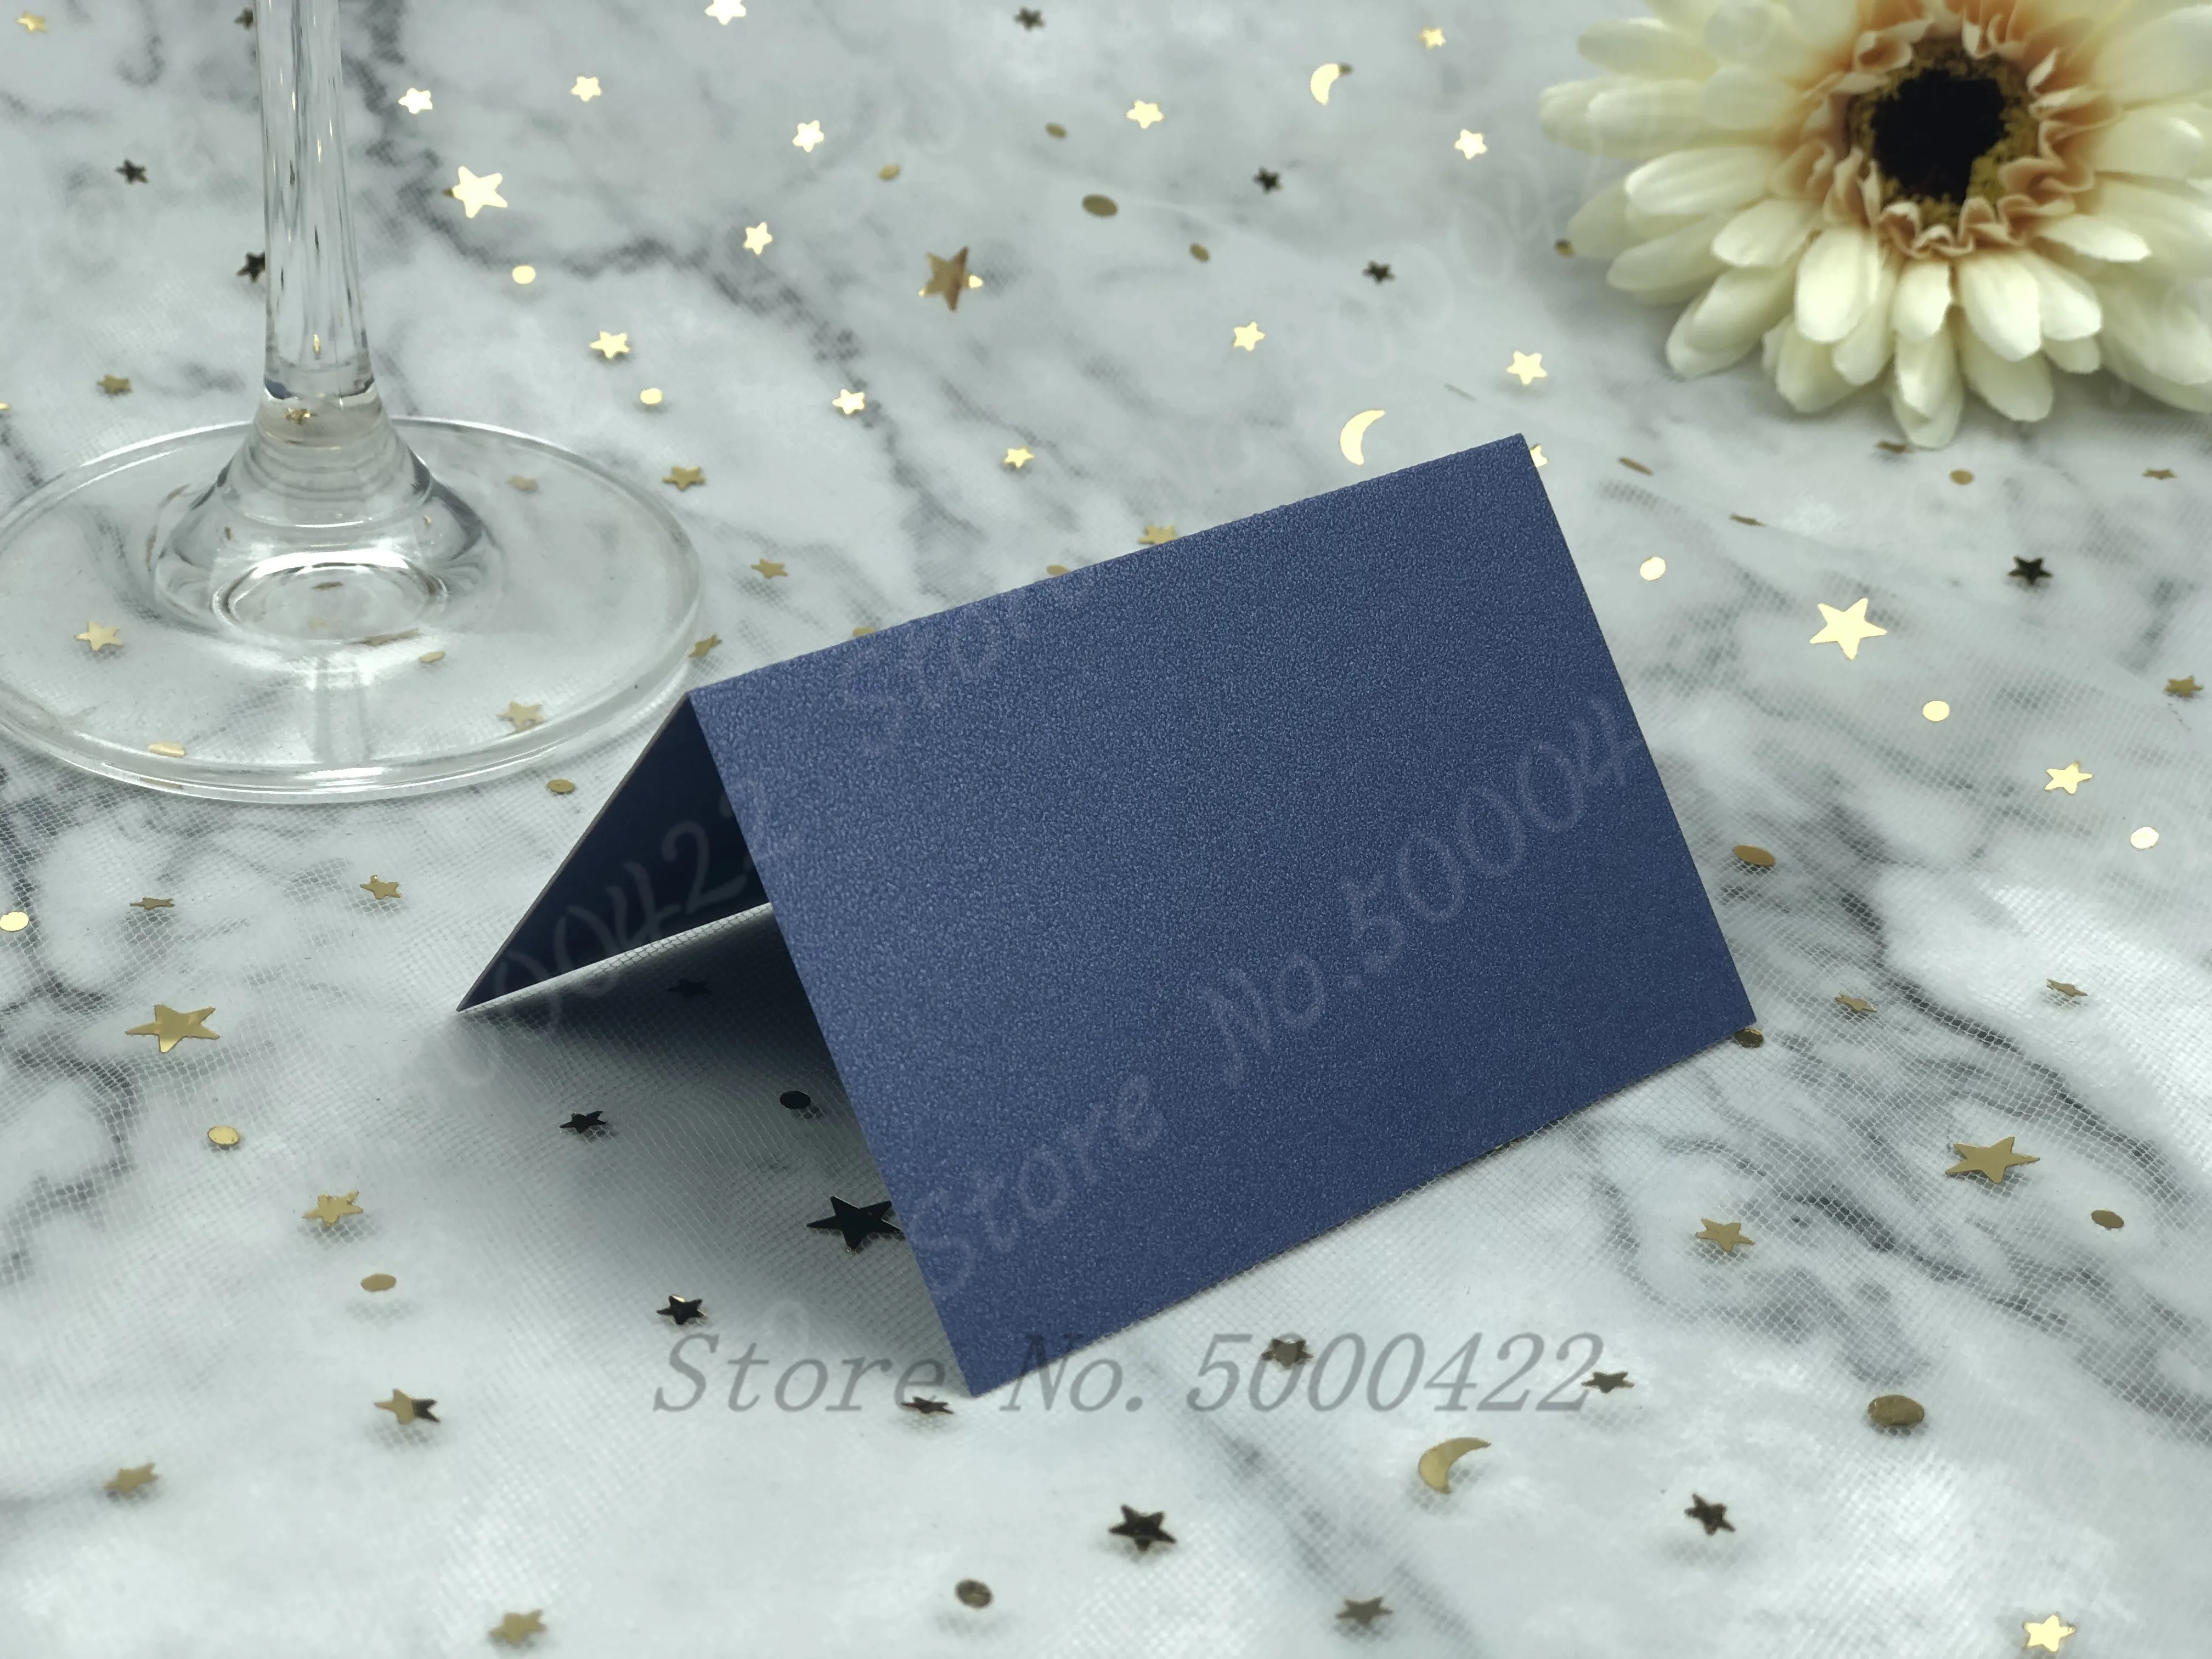 

50pcs Blank Fold Table Mark Wine Glass Name Place Card Baby Shower Theme Event Banquet Invite Guest Favor Restaurant Decor Cards